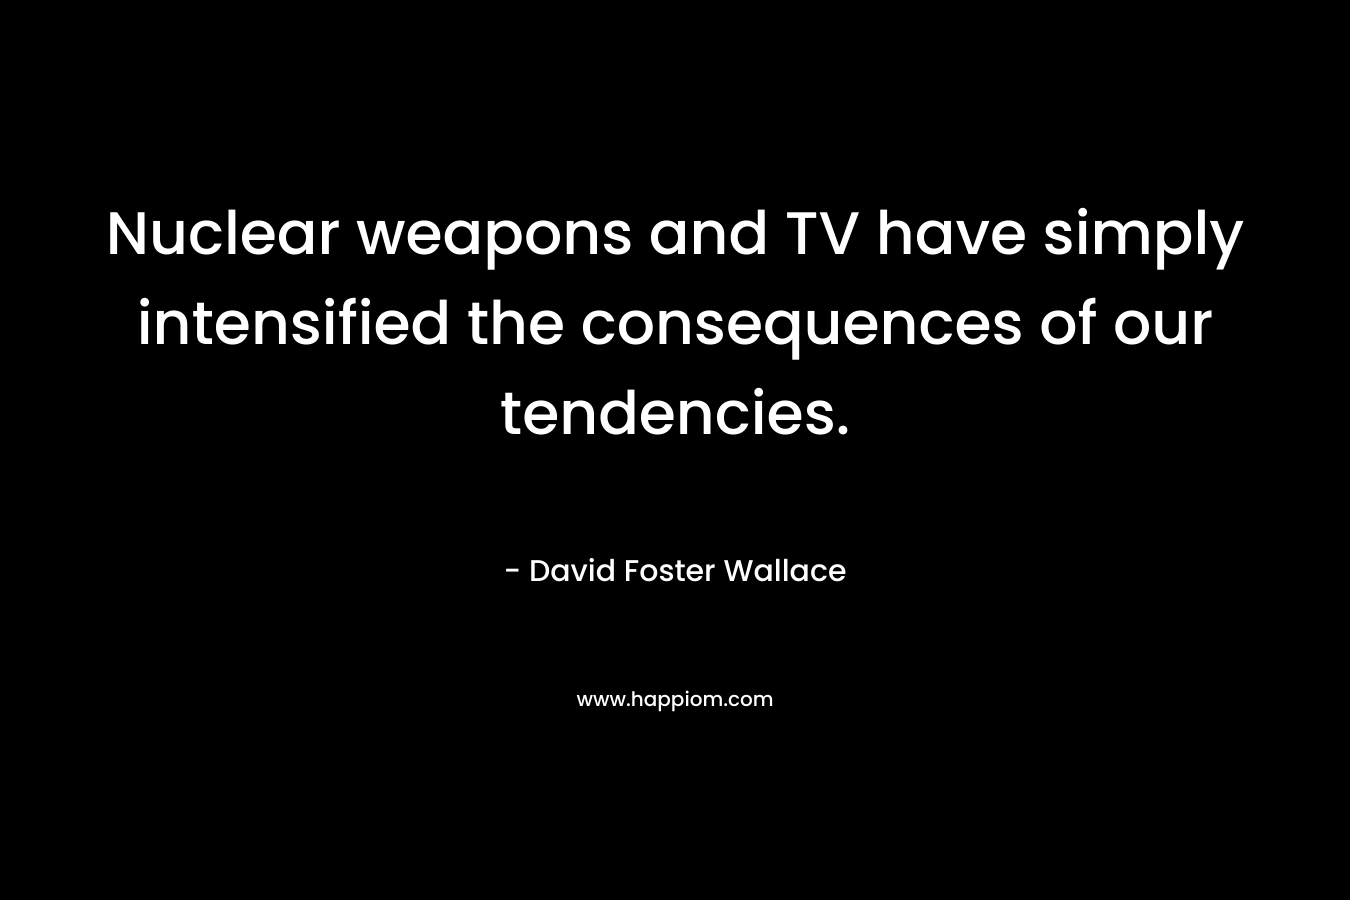 Nuclear weapons and TV have simply intensified the consequences of our tendencies. – David Foster Wallace